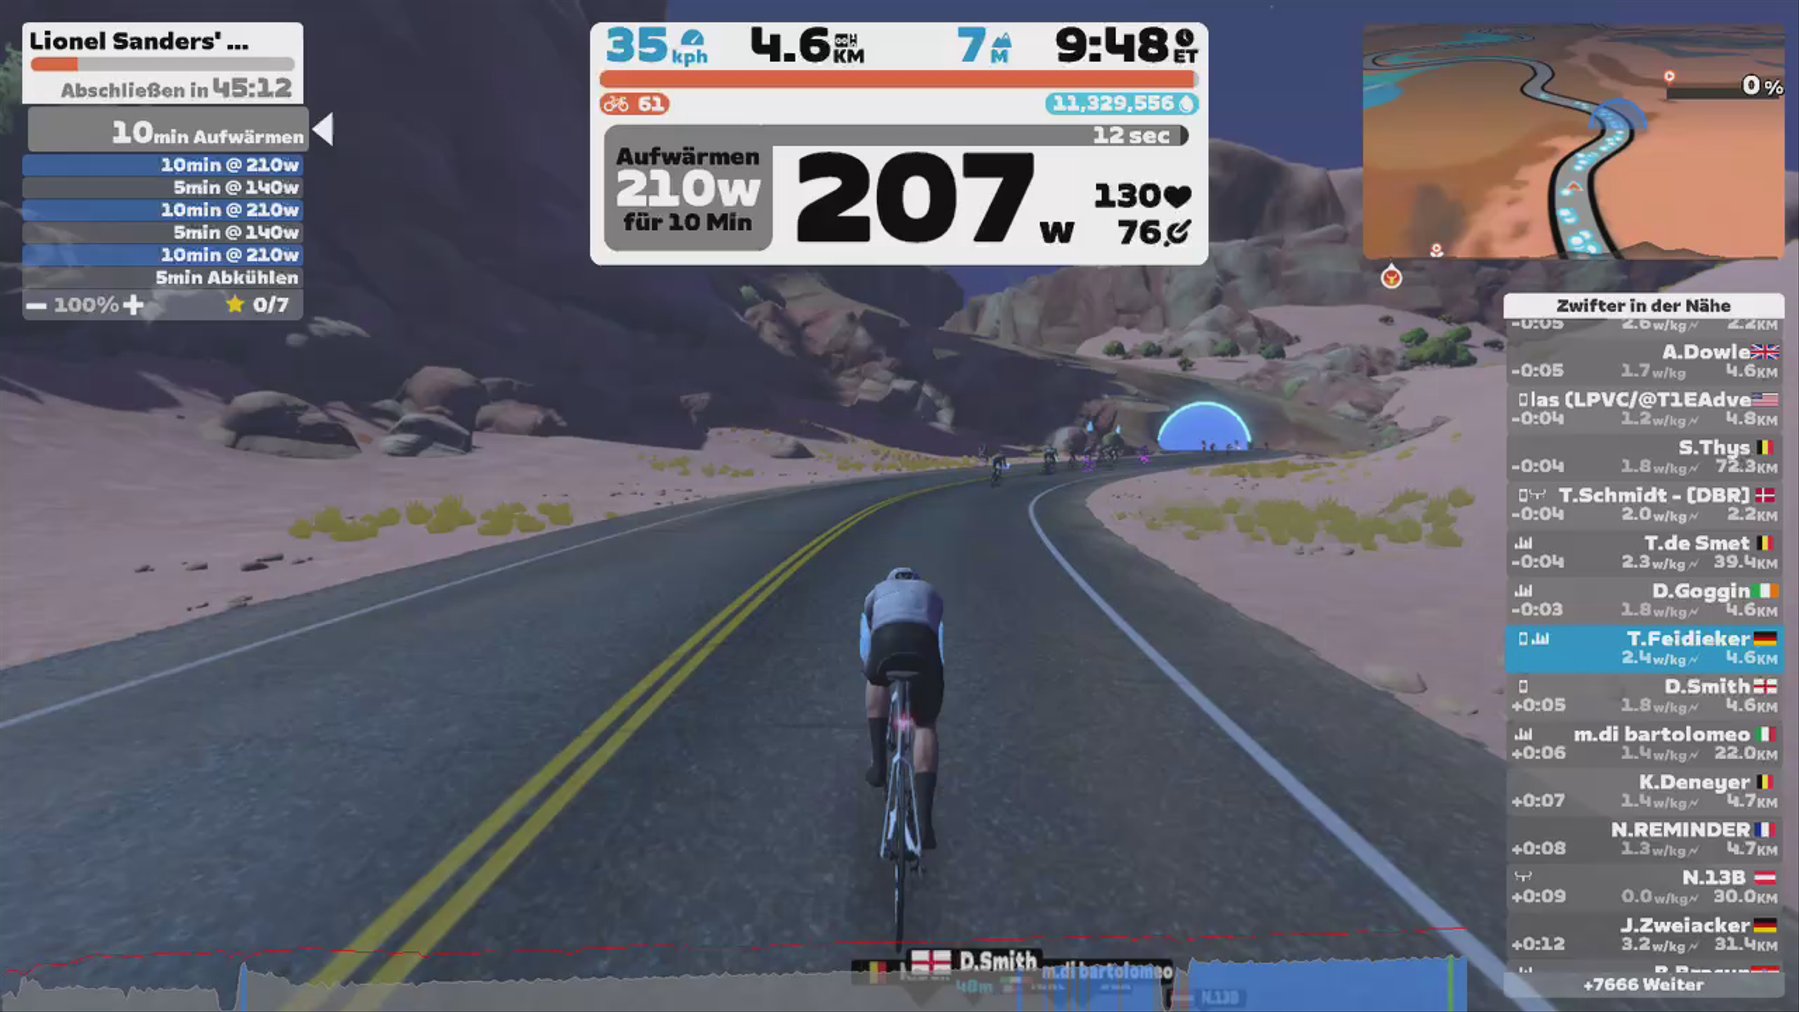 Zwift - Lionel Sanders' Yellow Day Workout in Watopia